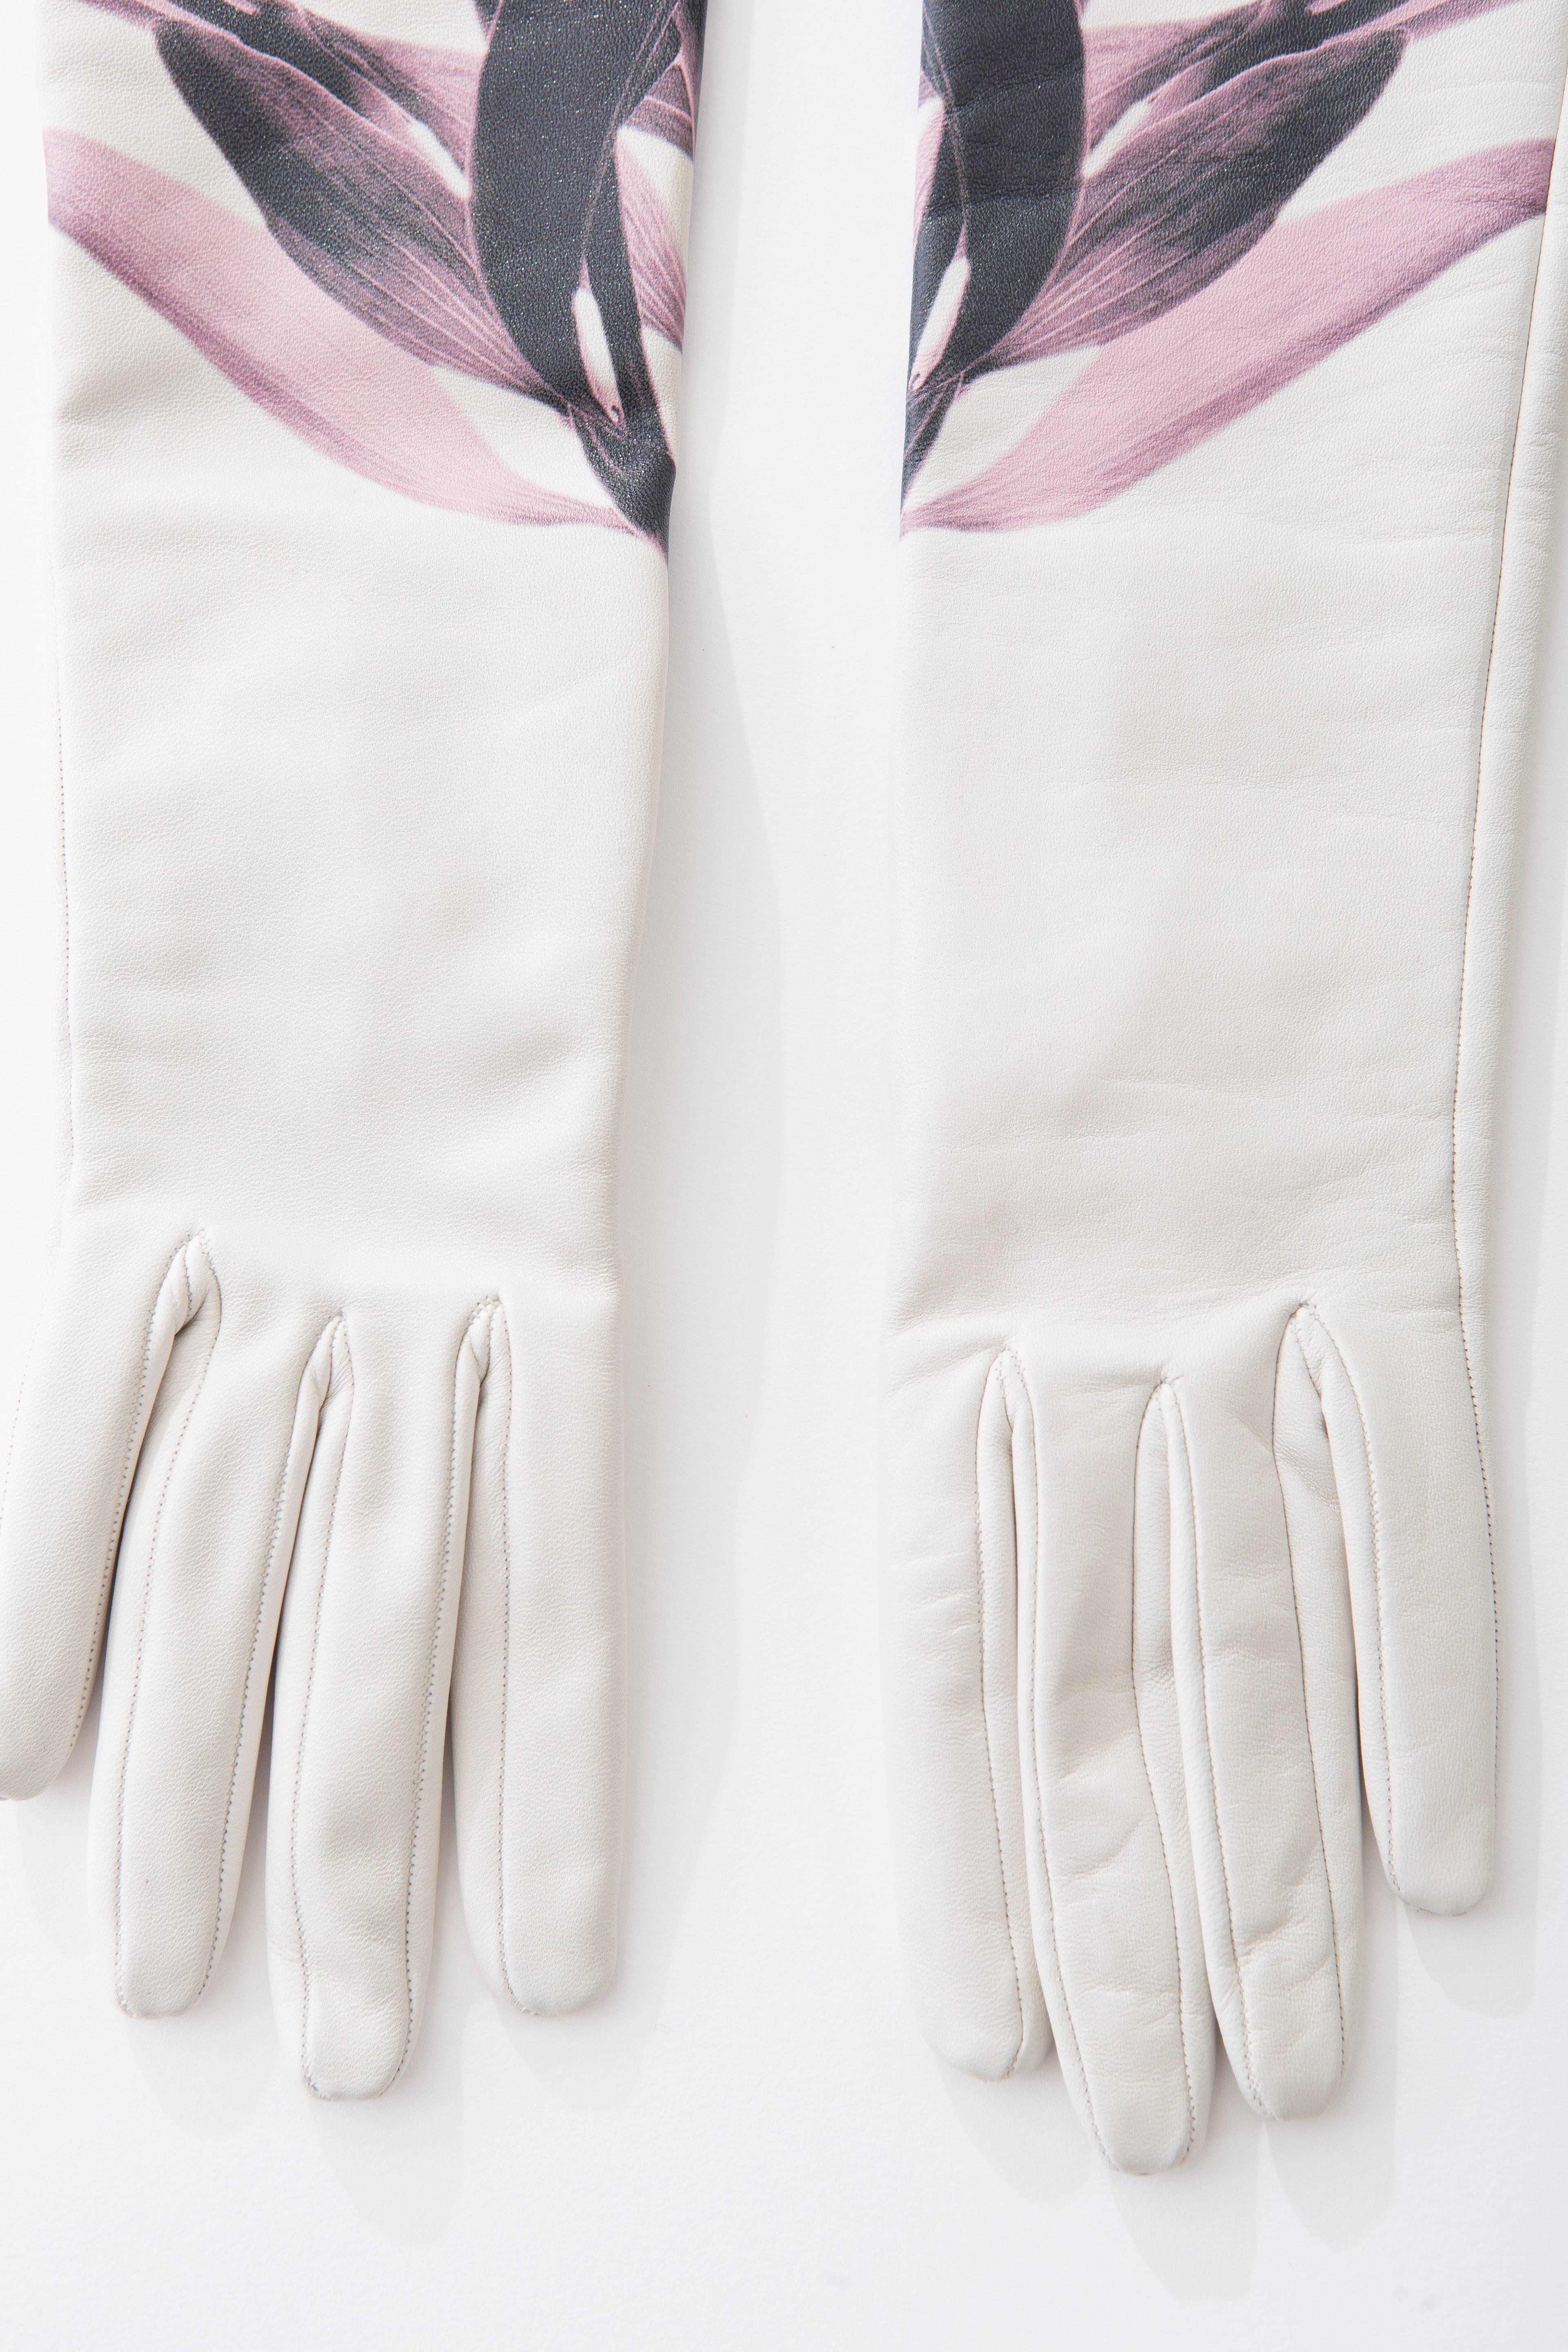 Women's  Raf Simons Christian Dior Ivory Printed Leather Gloves, Pre - Fall 2014